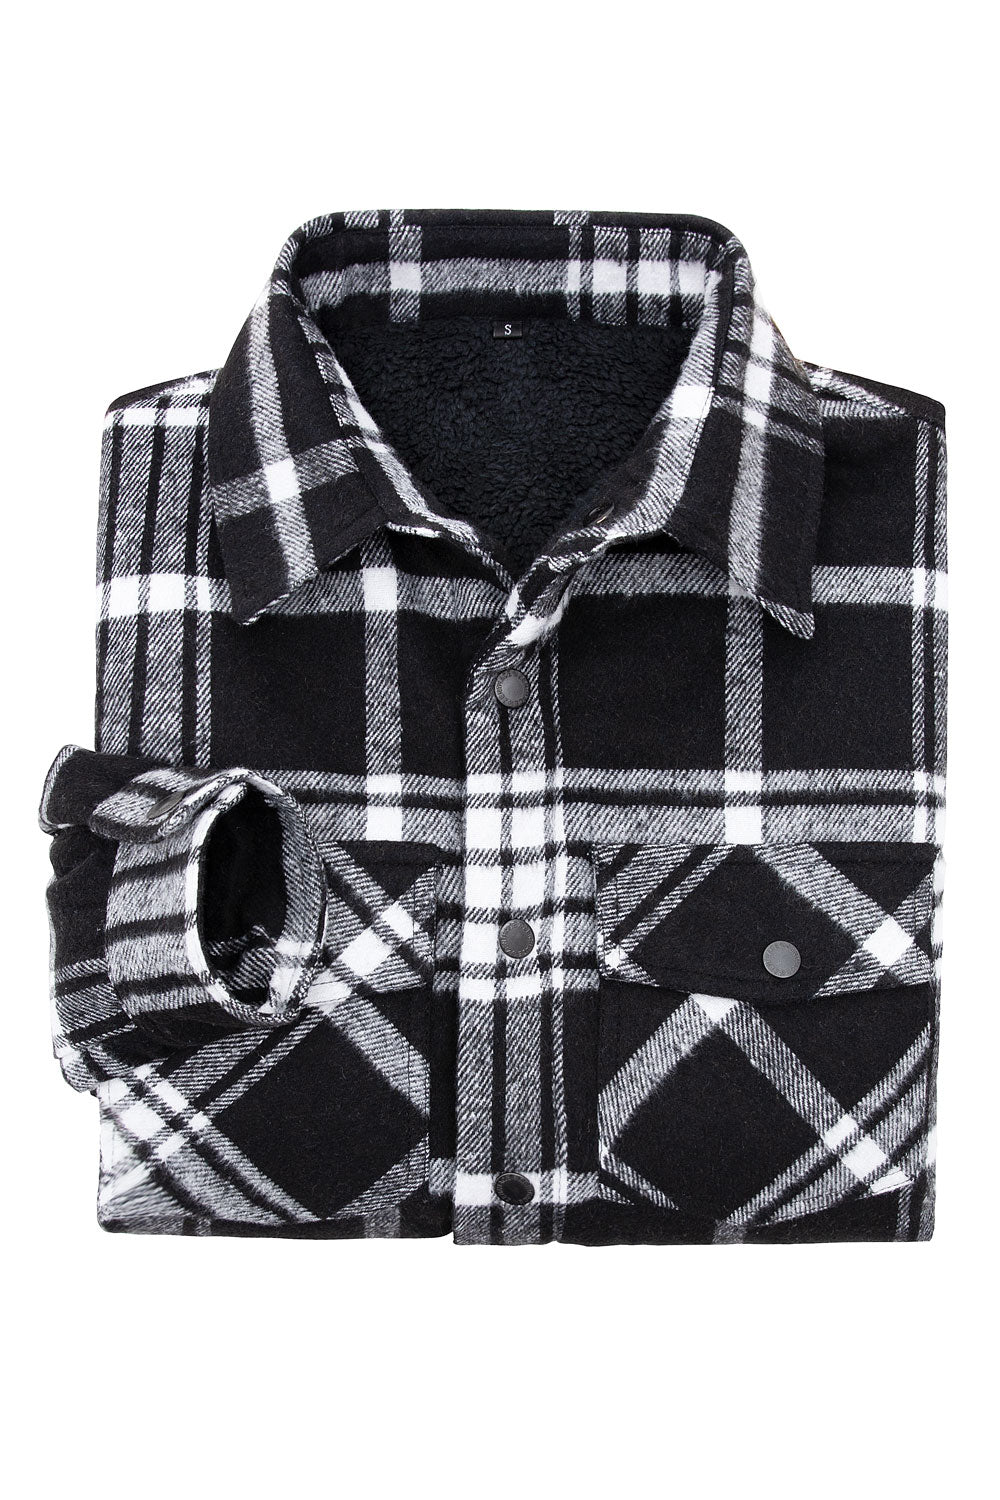 Men's Sherpa Lined Thick Flannel Shirt Jacket,Snap Plaid Flannel Jac